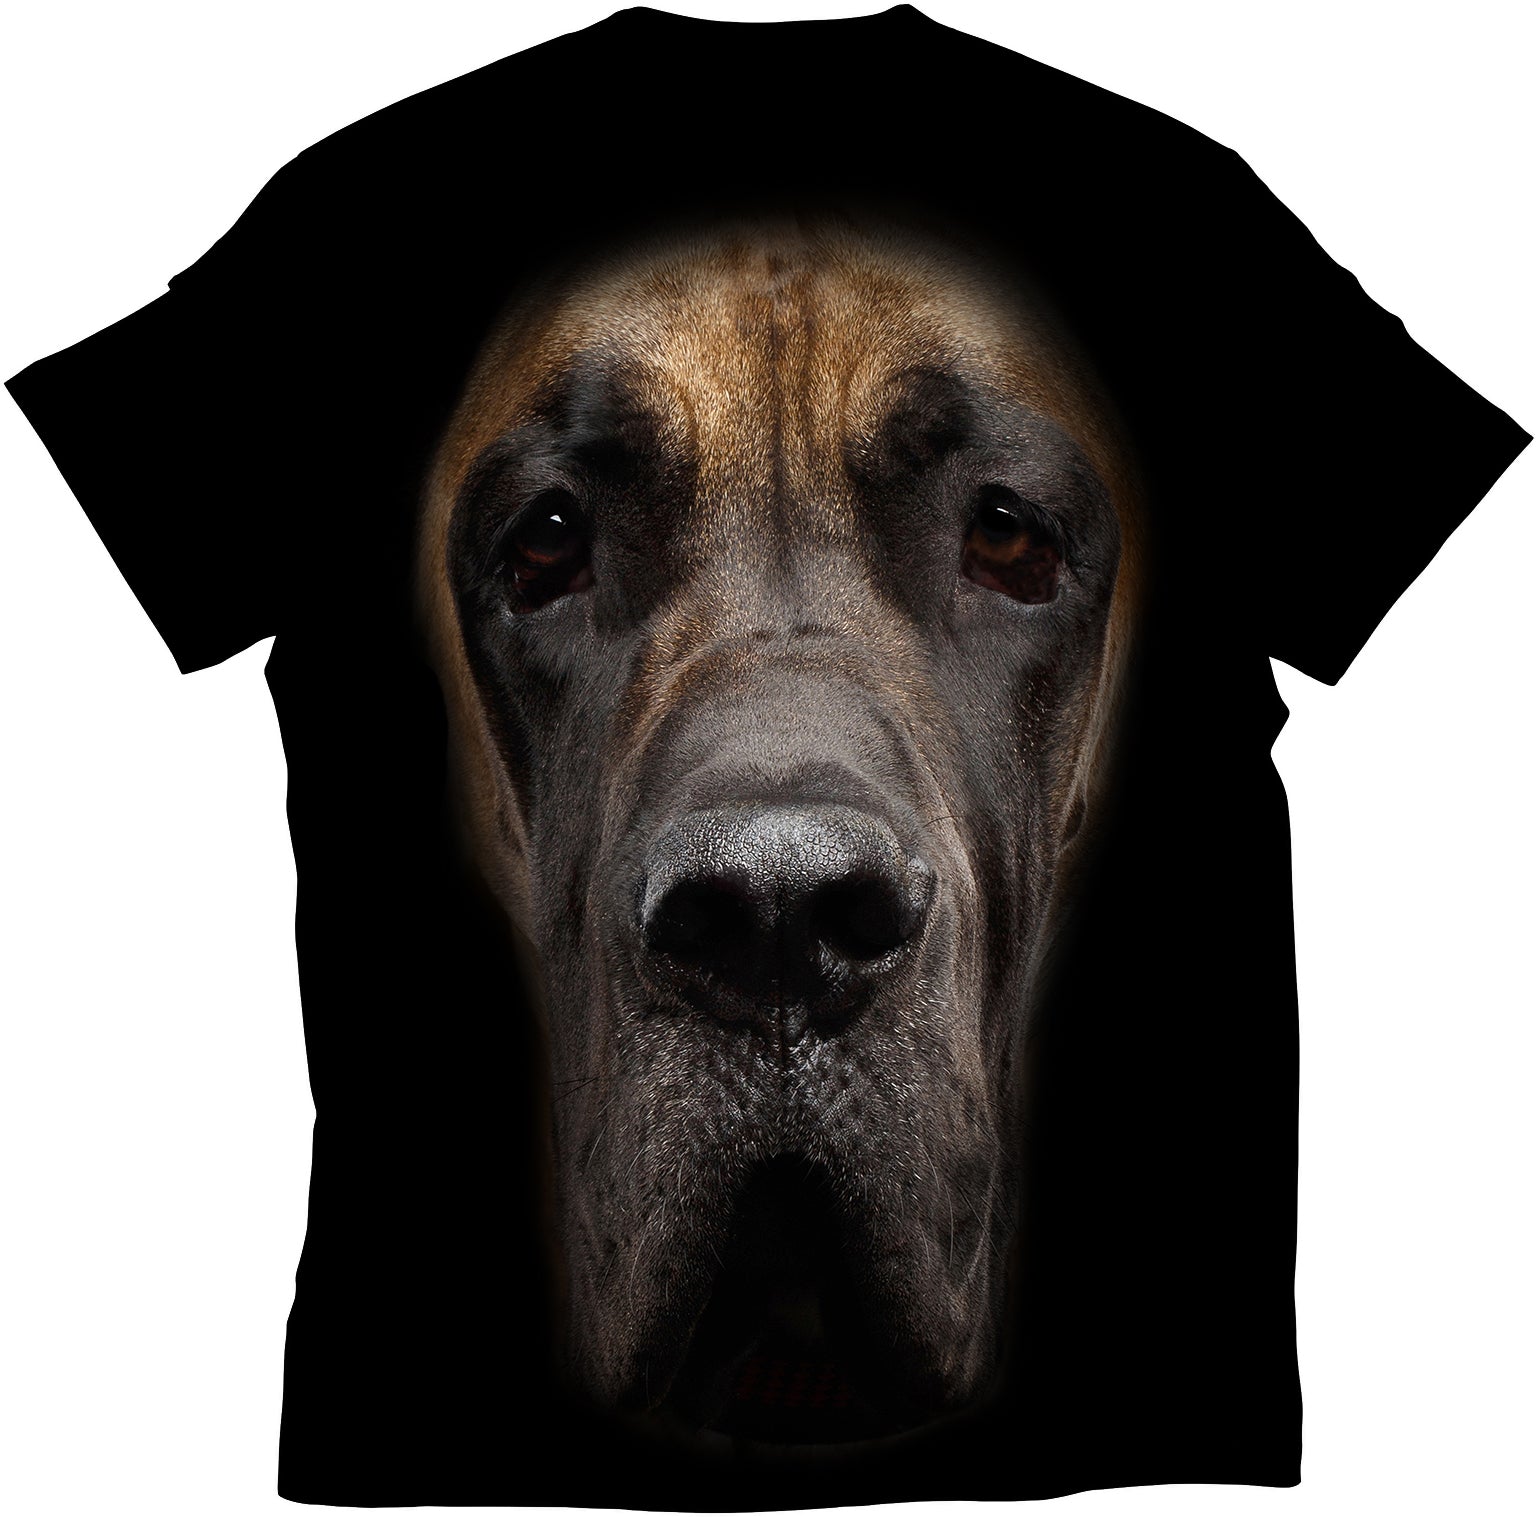 standout dog tshirt india great danes of instagram dogs of instagram dog great dane love great danes danes of instagram gentle giant great dane lovers puppies of instagram great danes unlimited great dane photography great dane world dane big dog puppy love dogs puppies dog lovers dog life blue great dane great dane nation